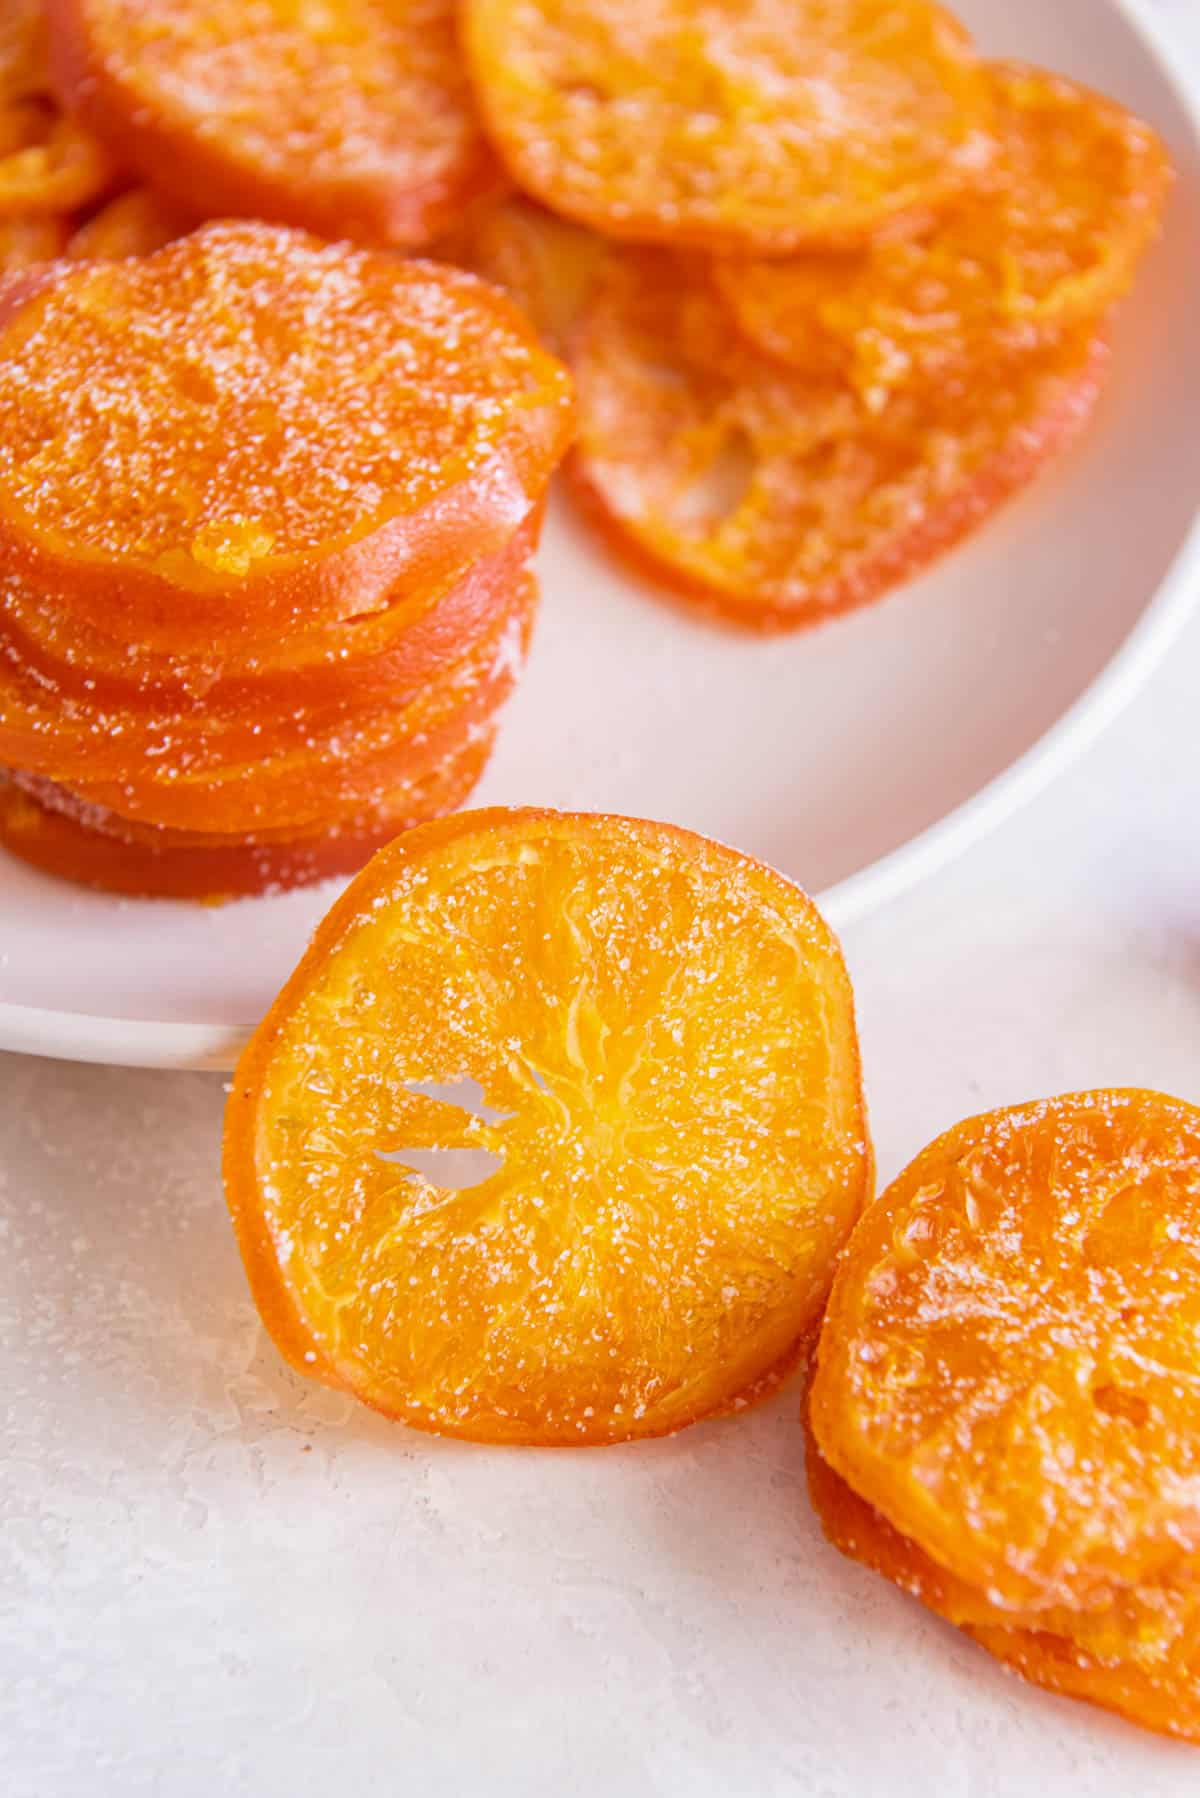 Candied orange slices sitting on a white plate with one candied orange peel sitting propped up in front of the plate.